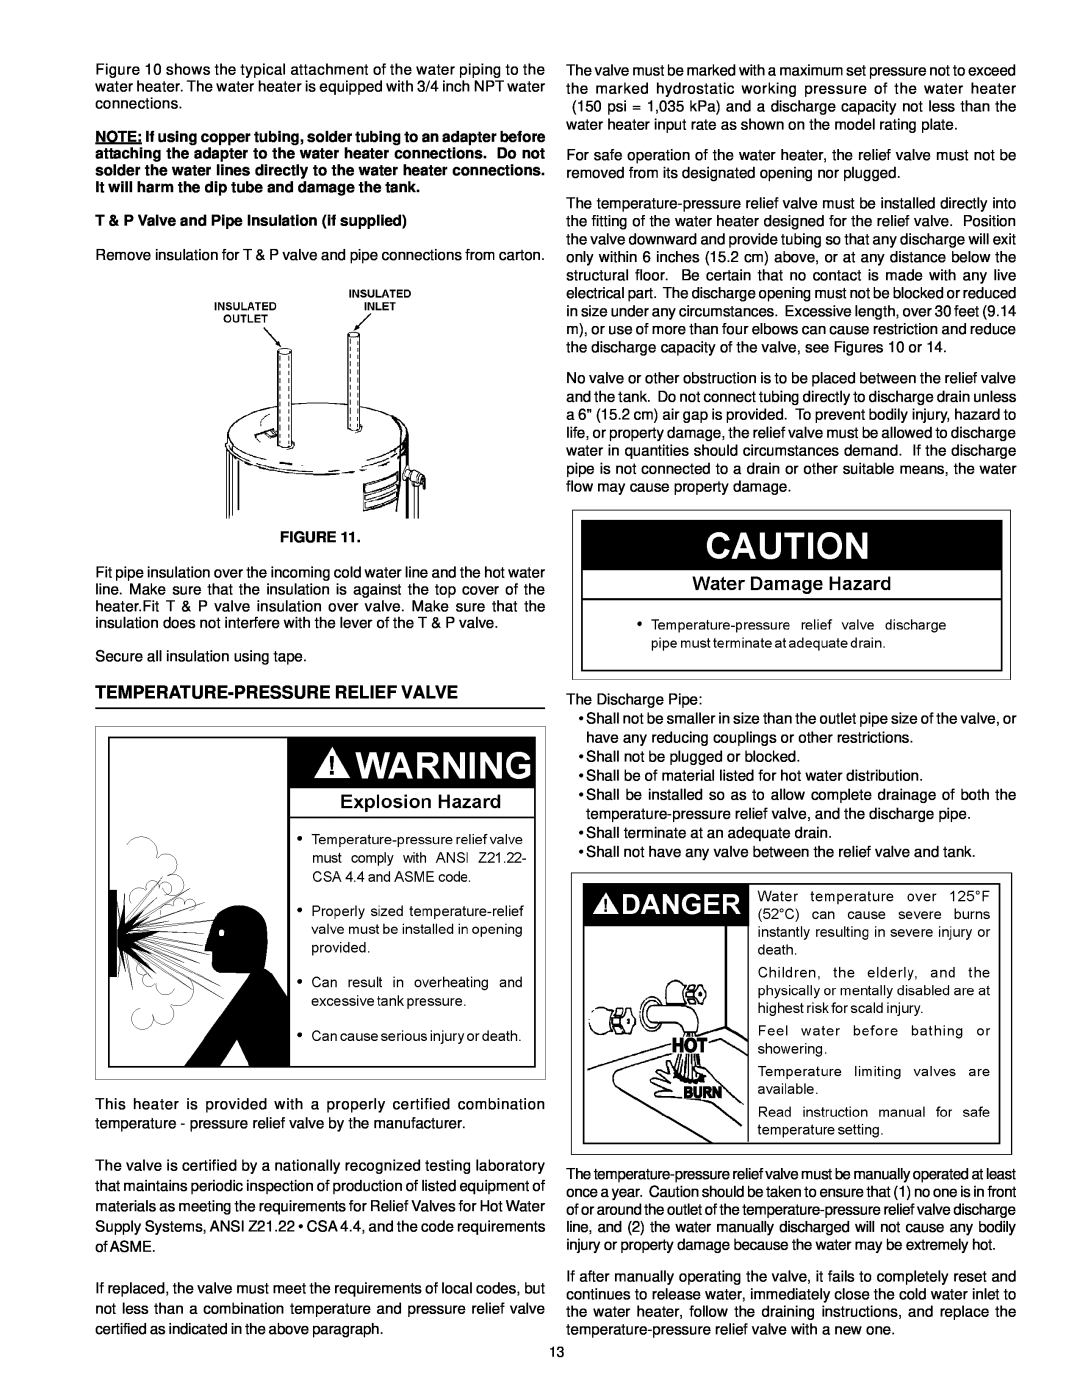 A.O. Smith ARGSS02708 instruction manual Temperature-Pressure Relief Valve, T & P Valve and Pipe Insulation if supplied 